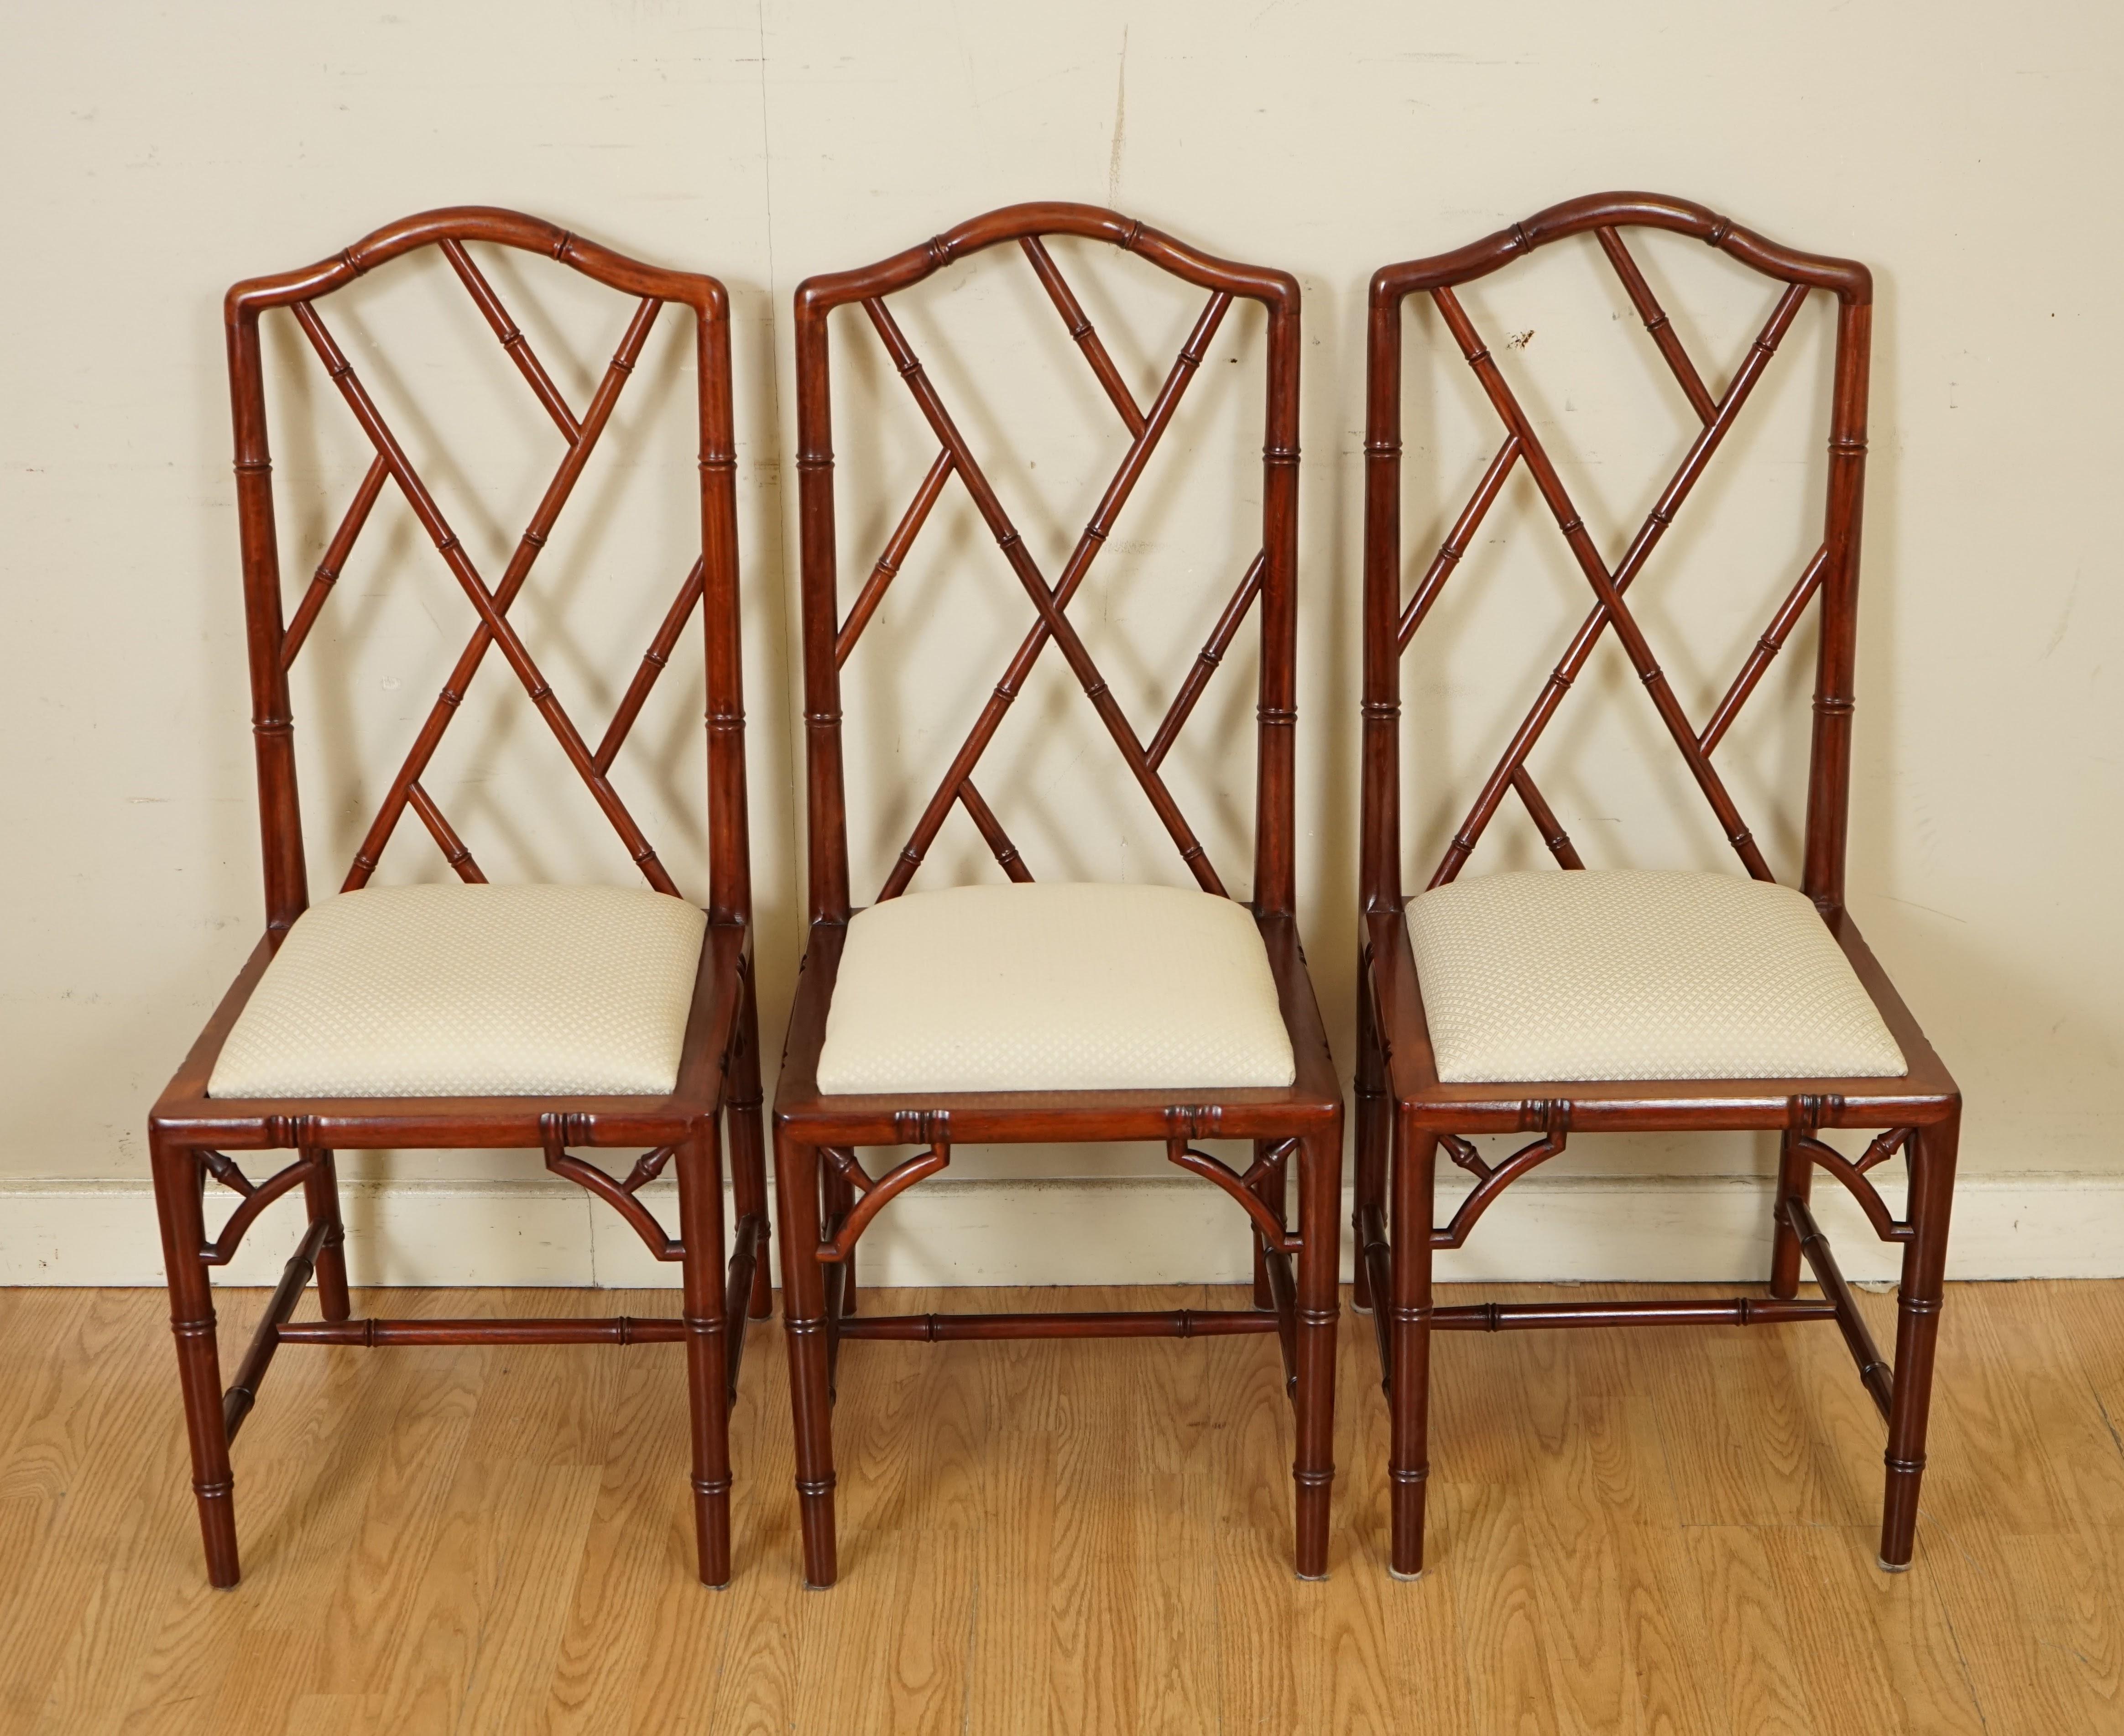 Hardwood Very Stunning Set of 8 Vintage Bamboo Dinning Chairs with White Fabric Seating